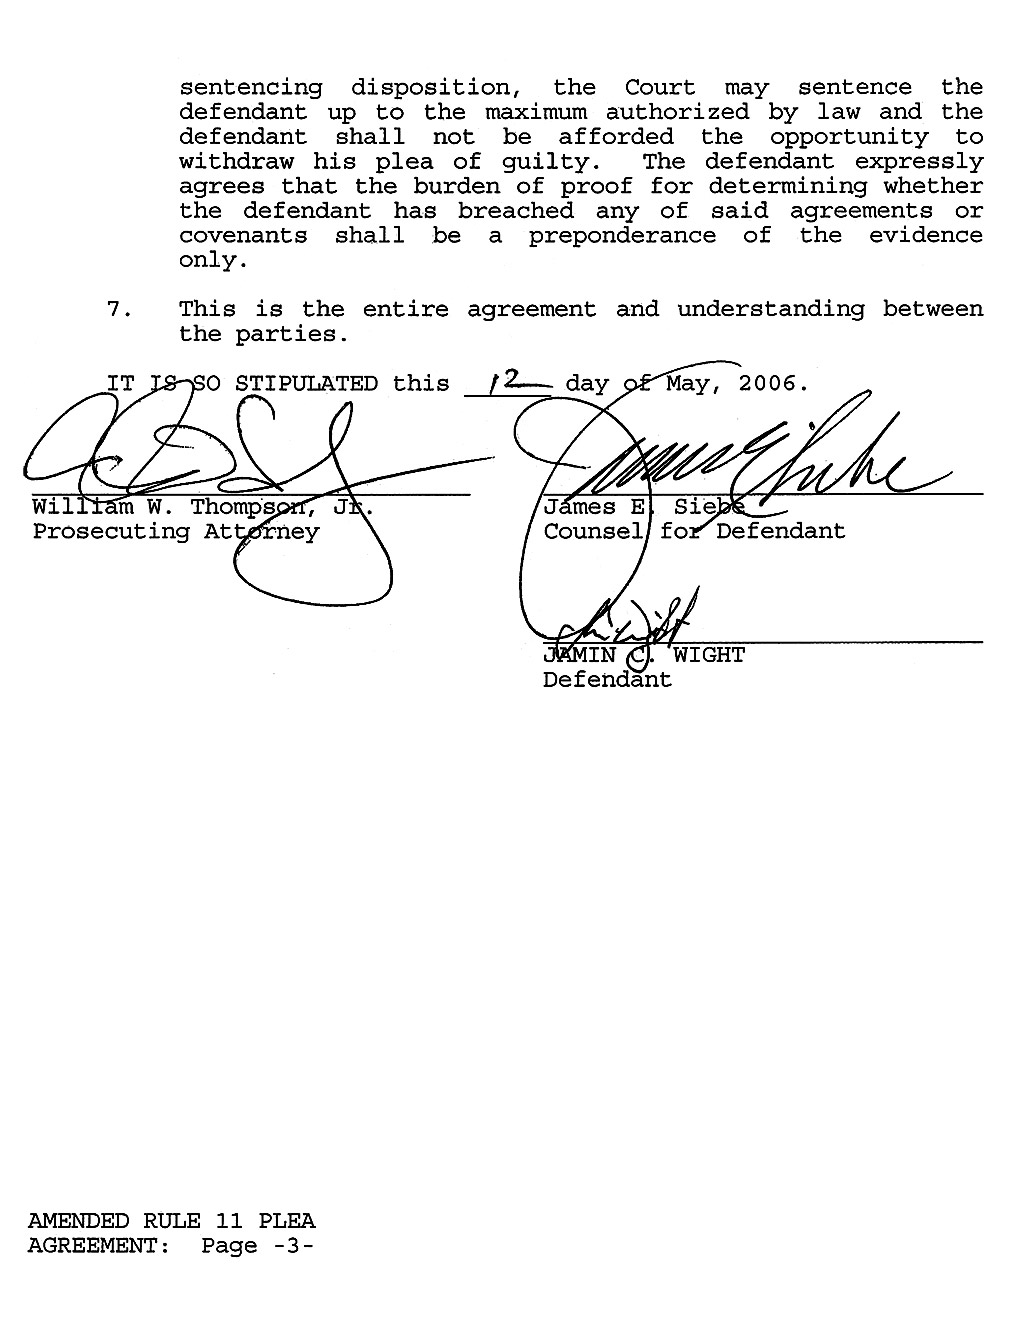 Amended Rule 11 Plea Agreement page 3